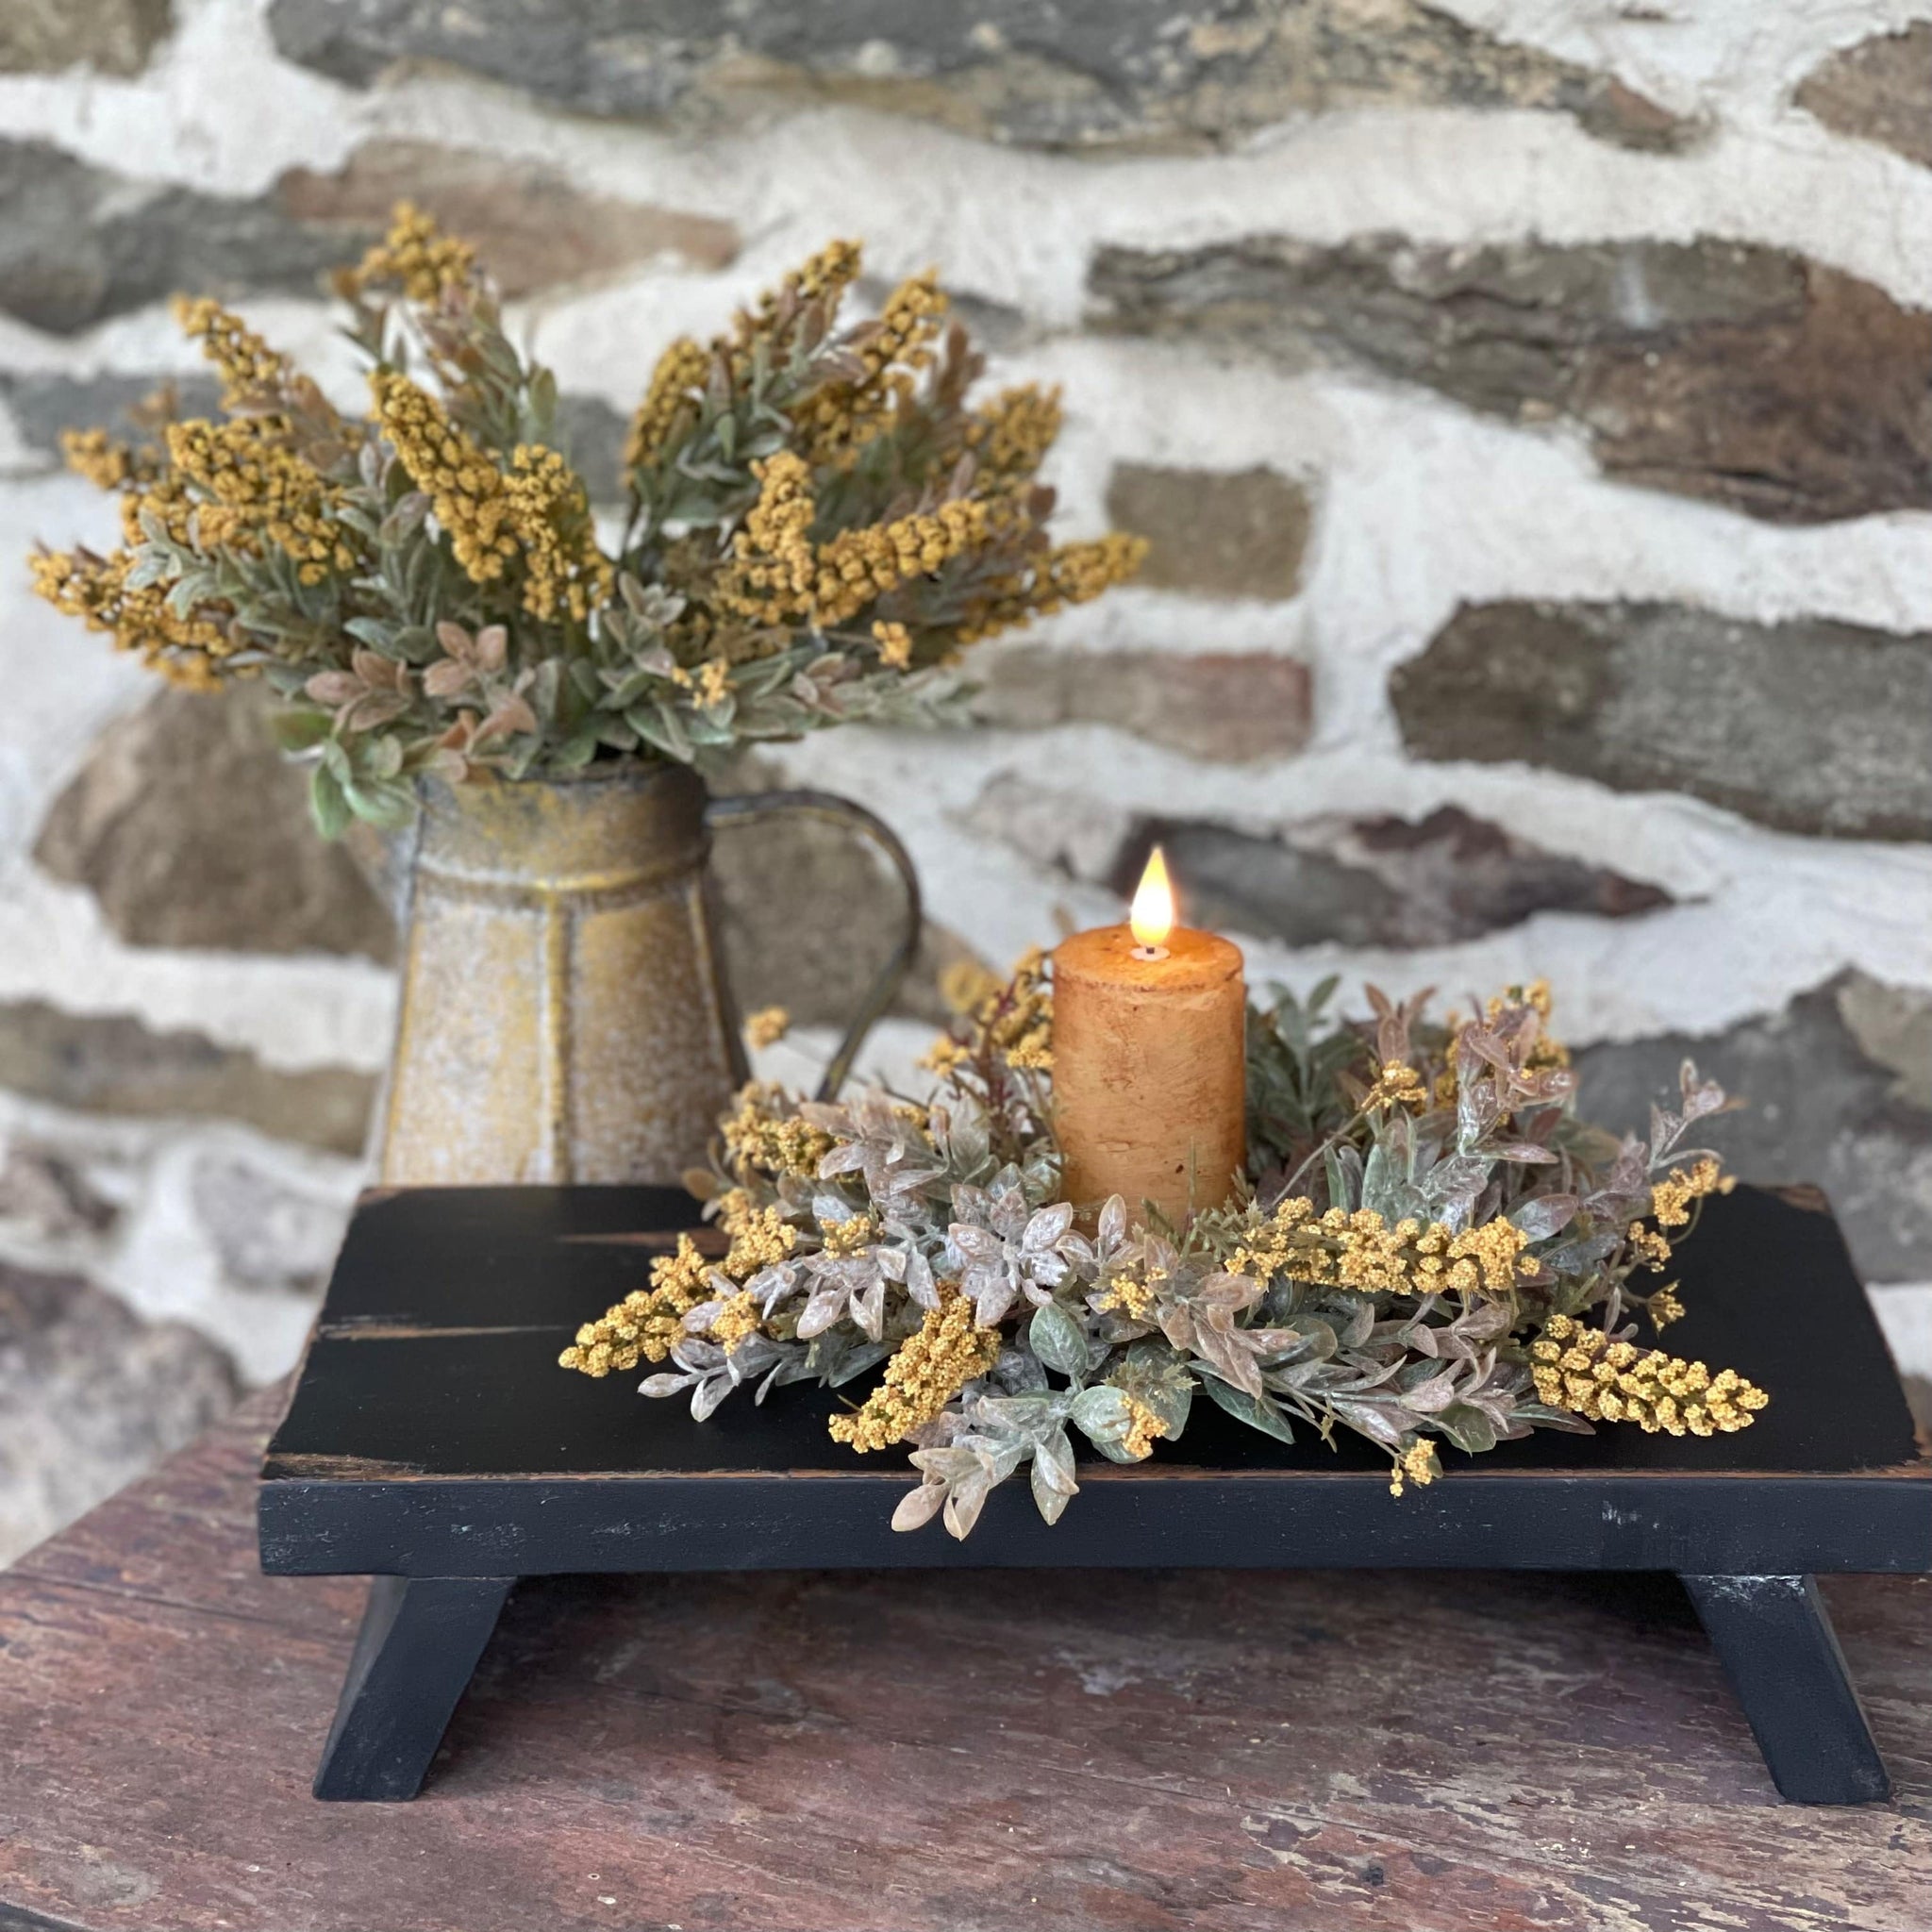 Fall Timer Candle w/ Mustard Floral Ring Country Fall Decor, Fall, Fall Decor, Fall Decorating, Fall Decorating Ideas, Farmhouse Fall Decor, New, Primitive Fall Decor, Rustic Fall Decor 